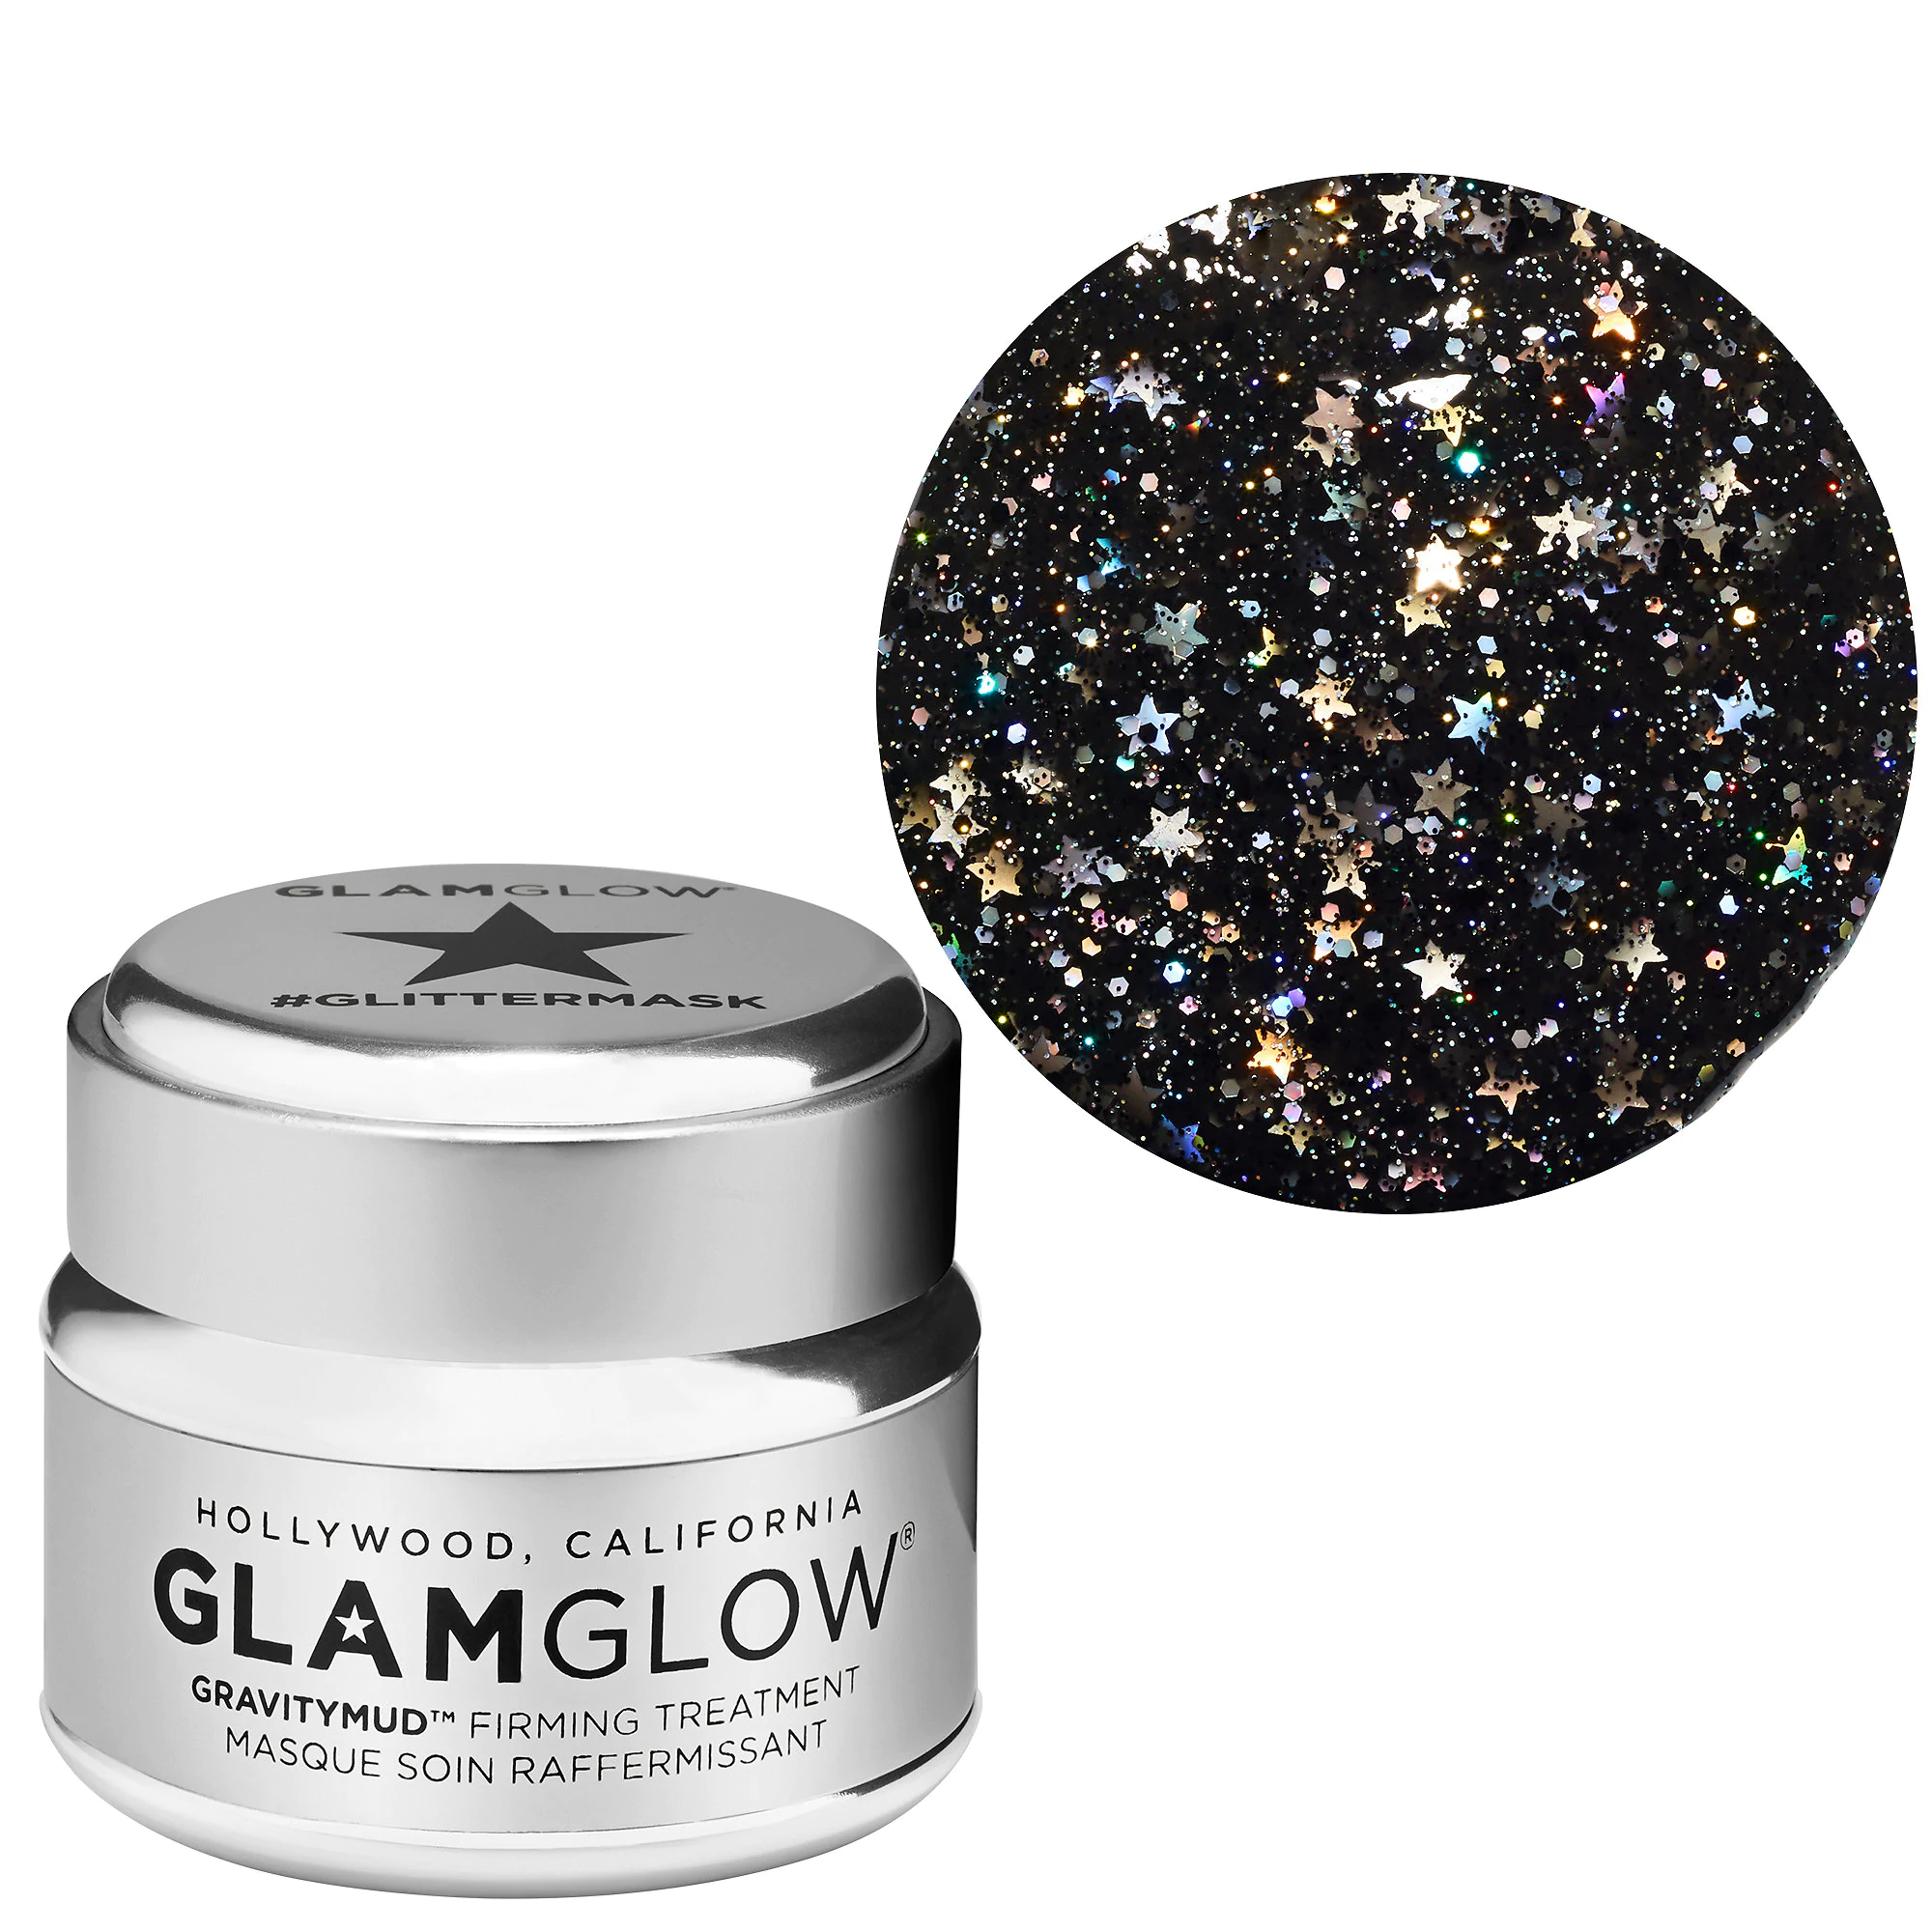 GlamGlow Gravity Mud firming mask review